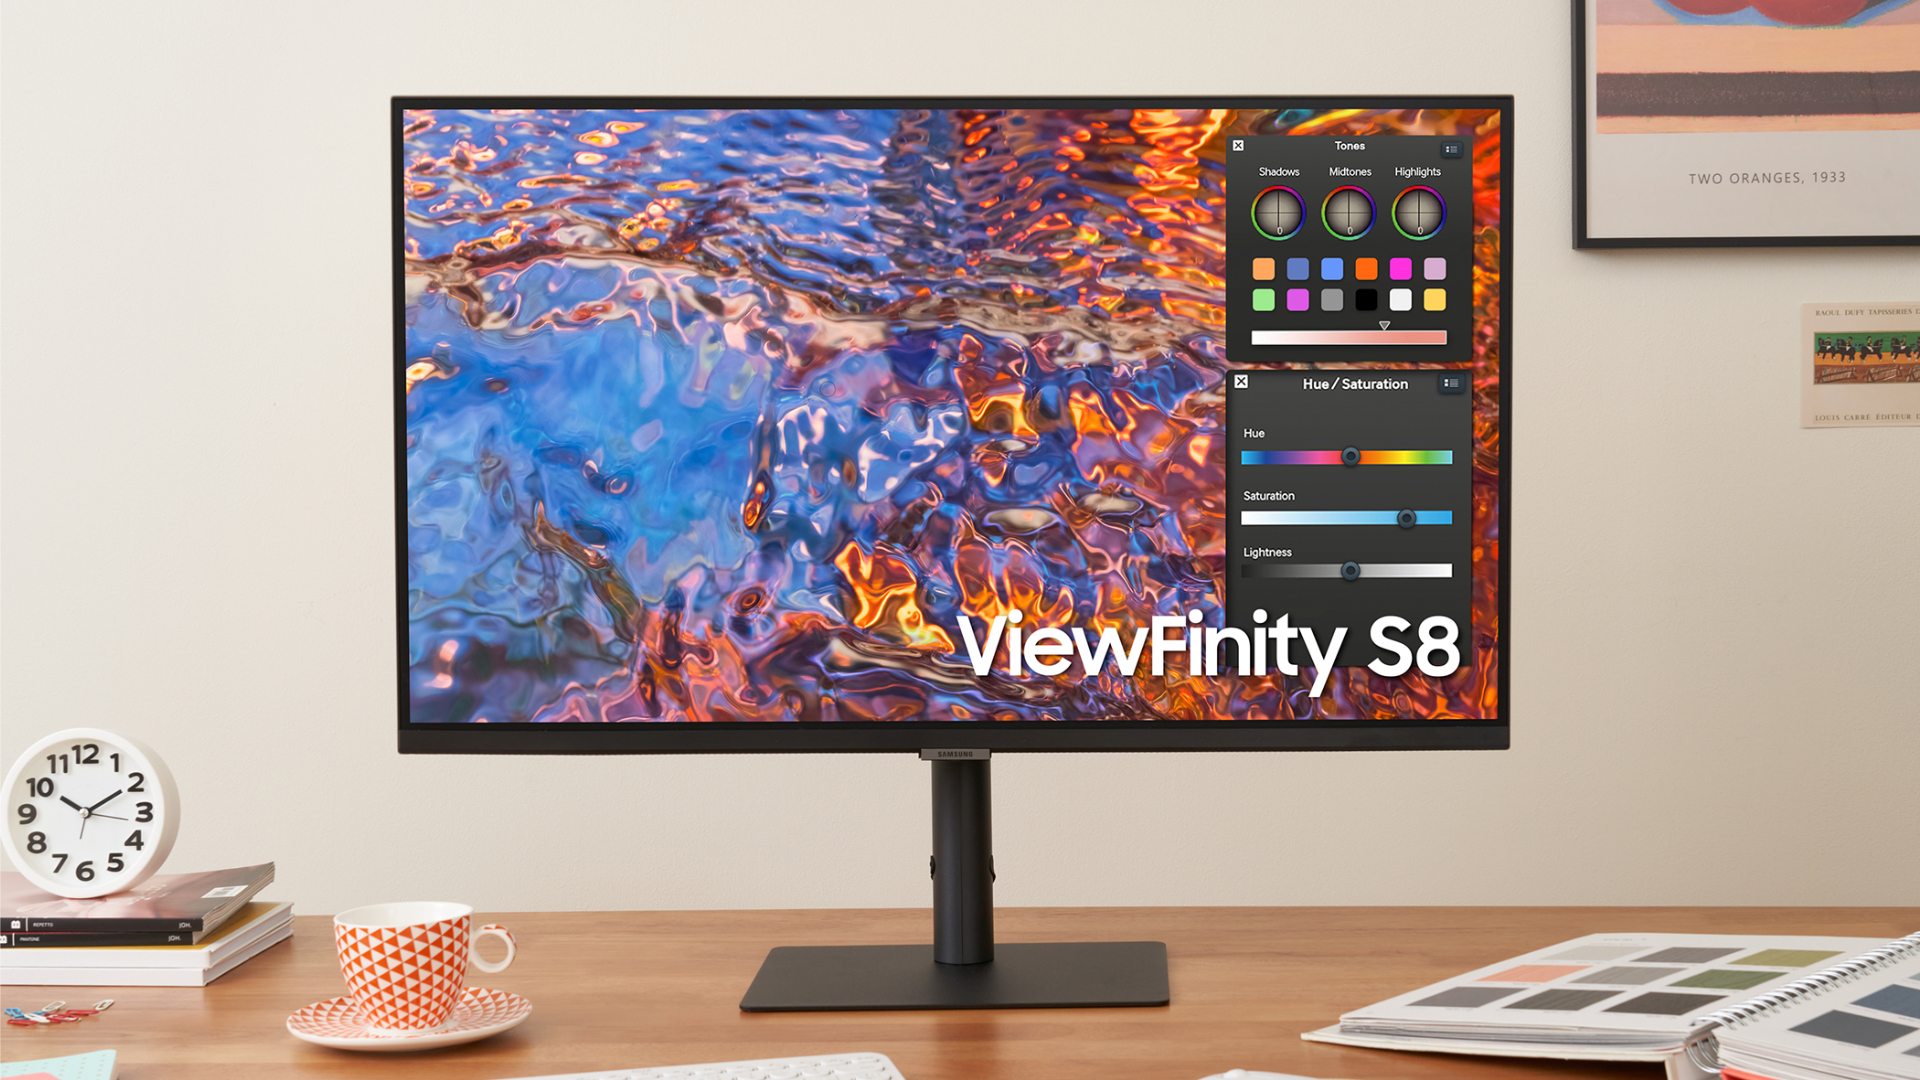 Samsung ViewFinity S8 monitor is now available in the US